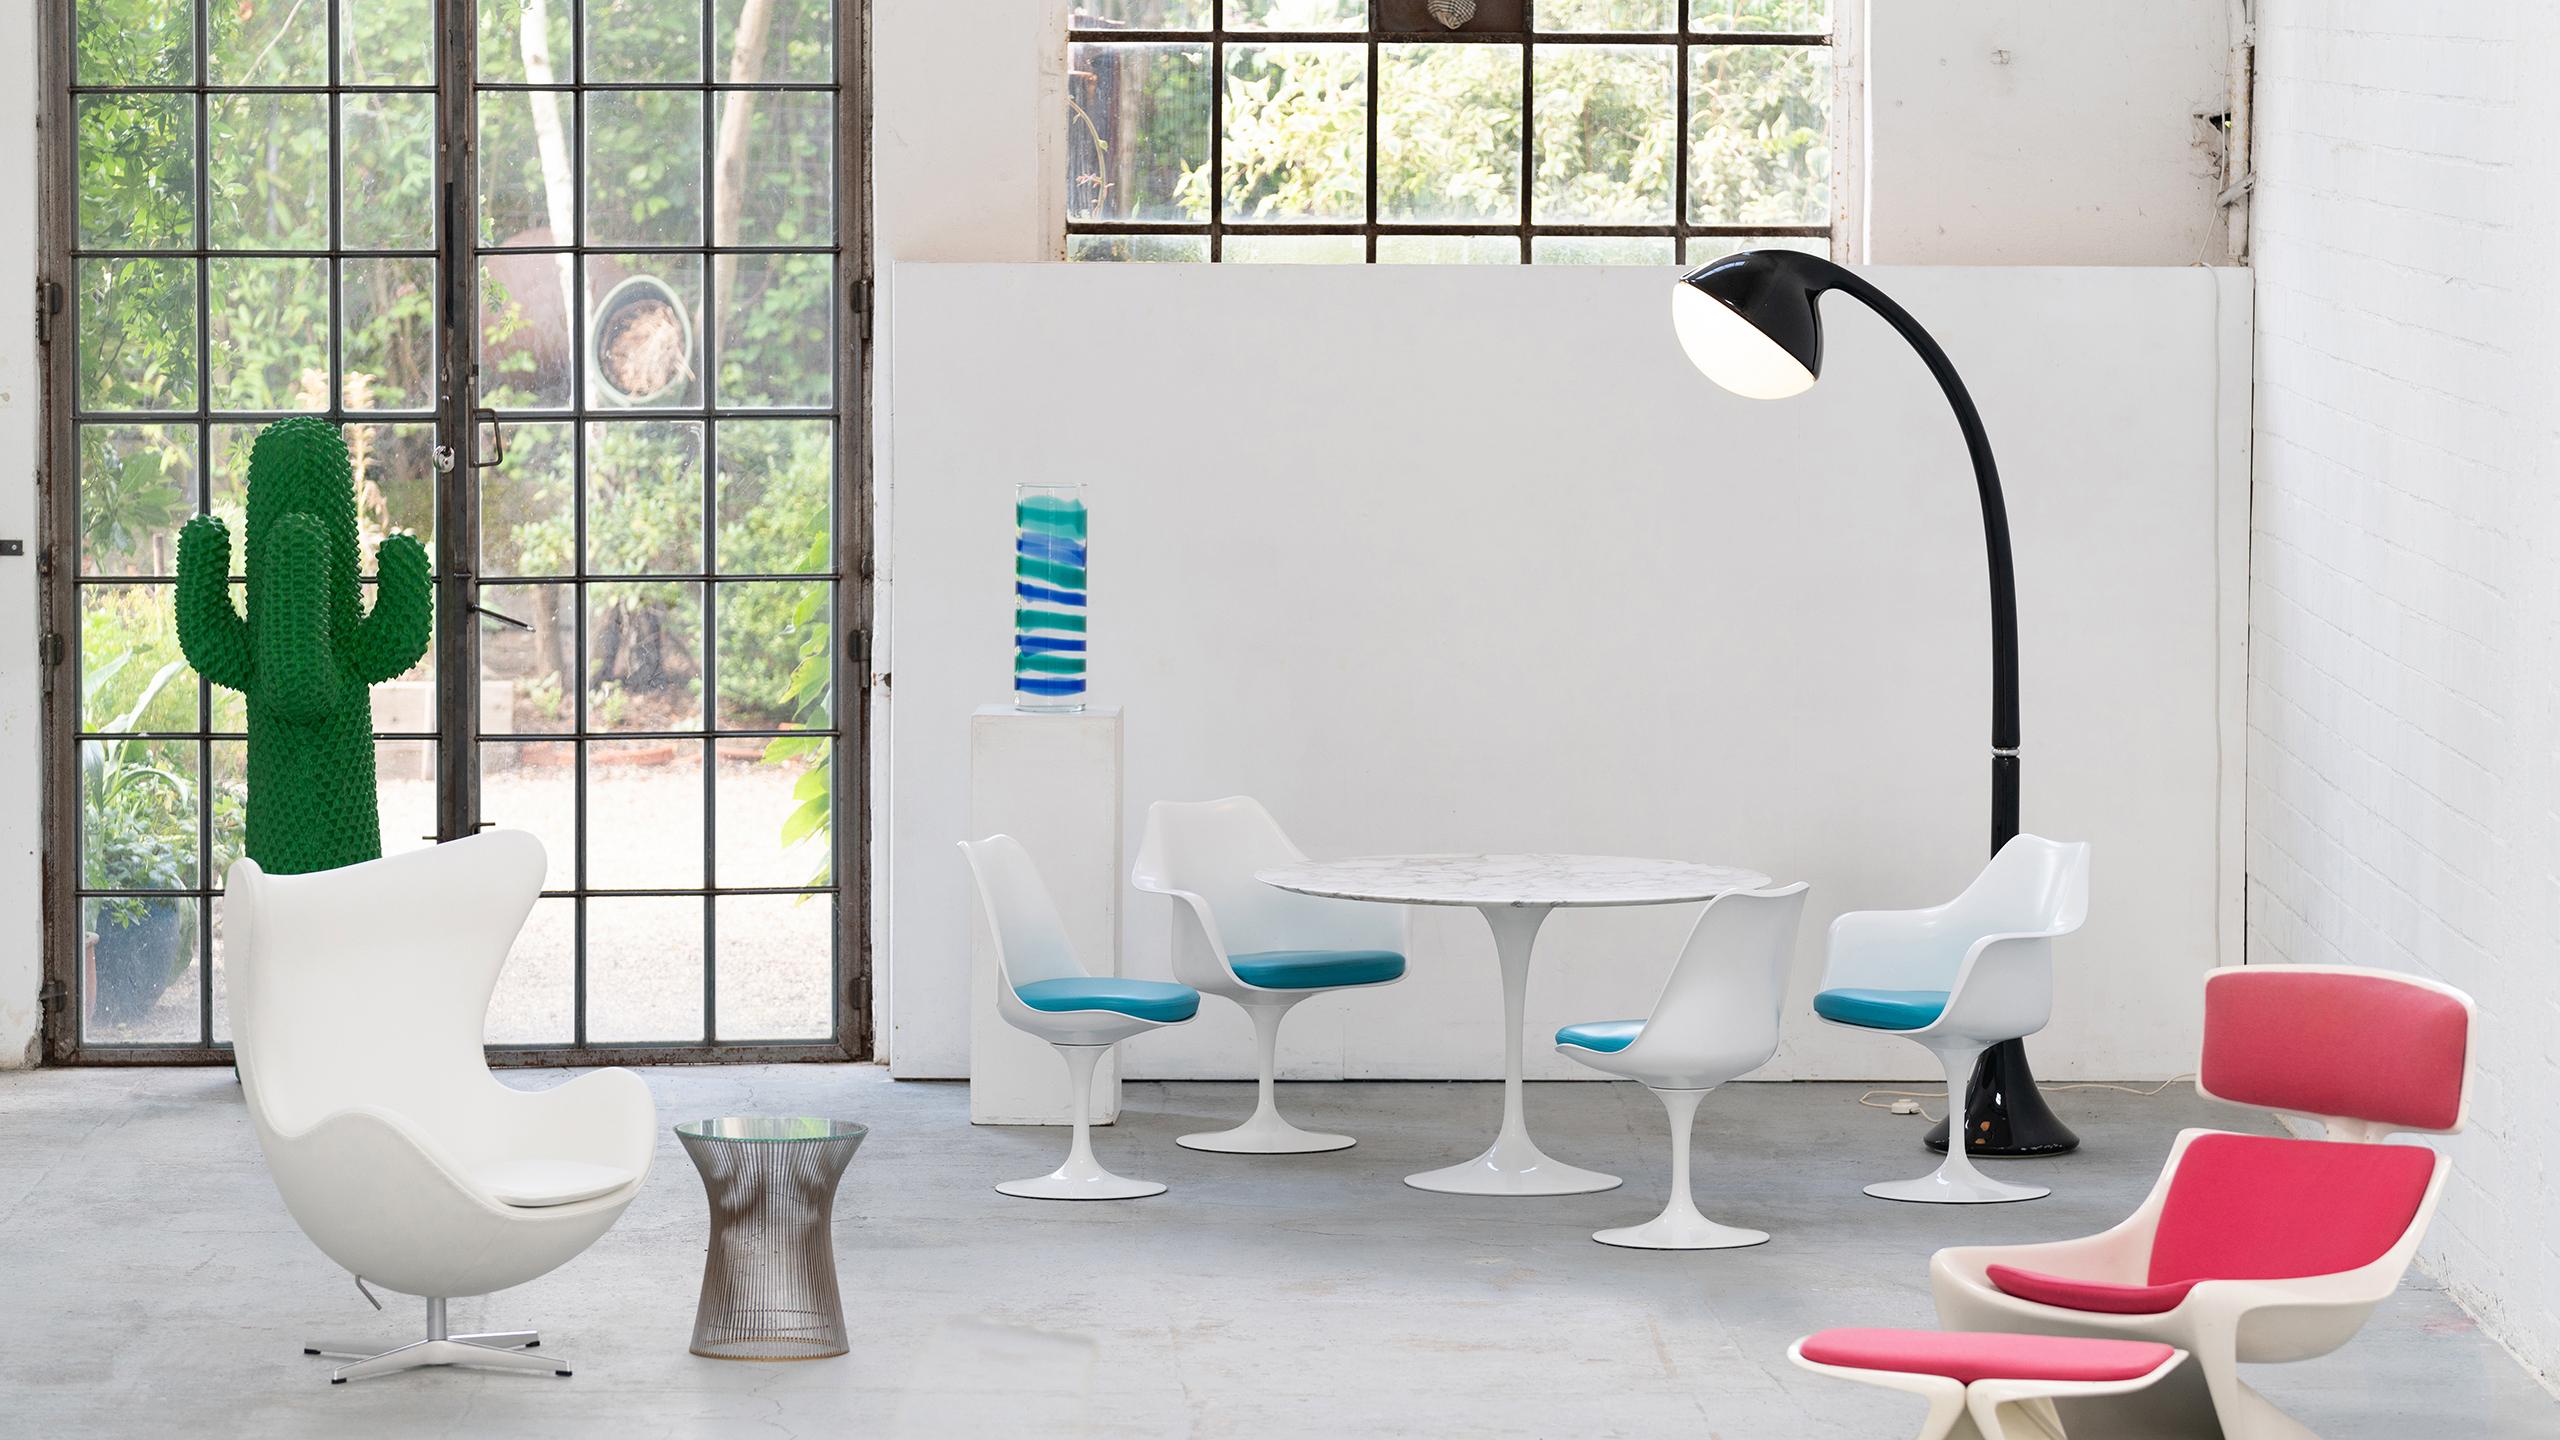 We offer here 4 virtually new tulip chairs by Eero Saarinen, all swivel - with incredibly beautiful turquoise-blue leather.
Produced by Knoll International.

The complete set was only used for 2 photoshootings and is therefore in perfect condition.